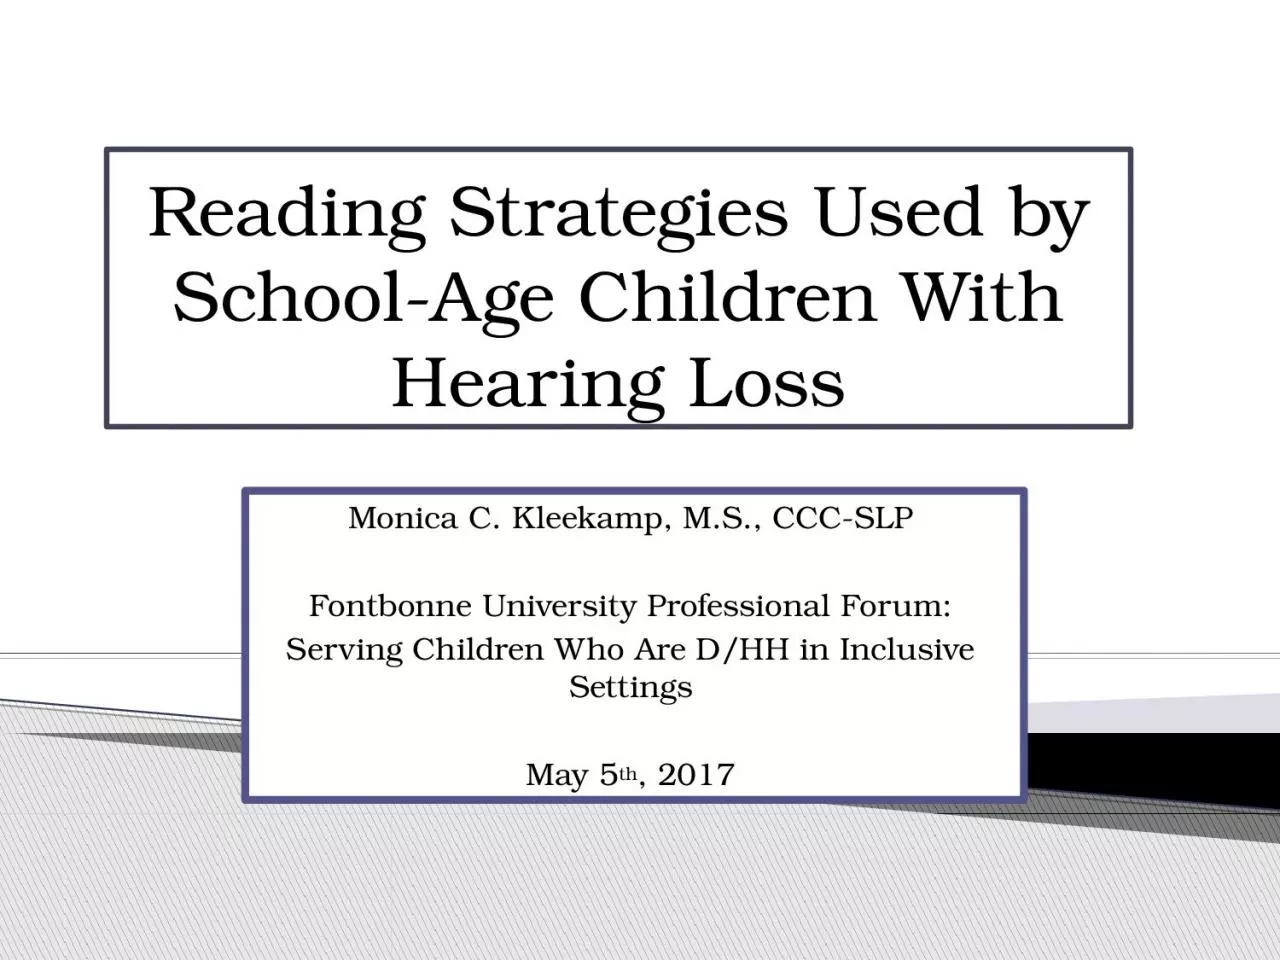 Reading Strategies Used by School-Age Children With Hearing Loss